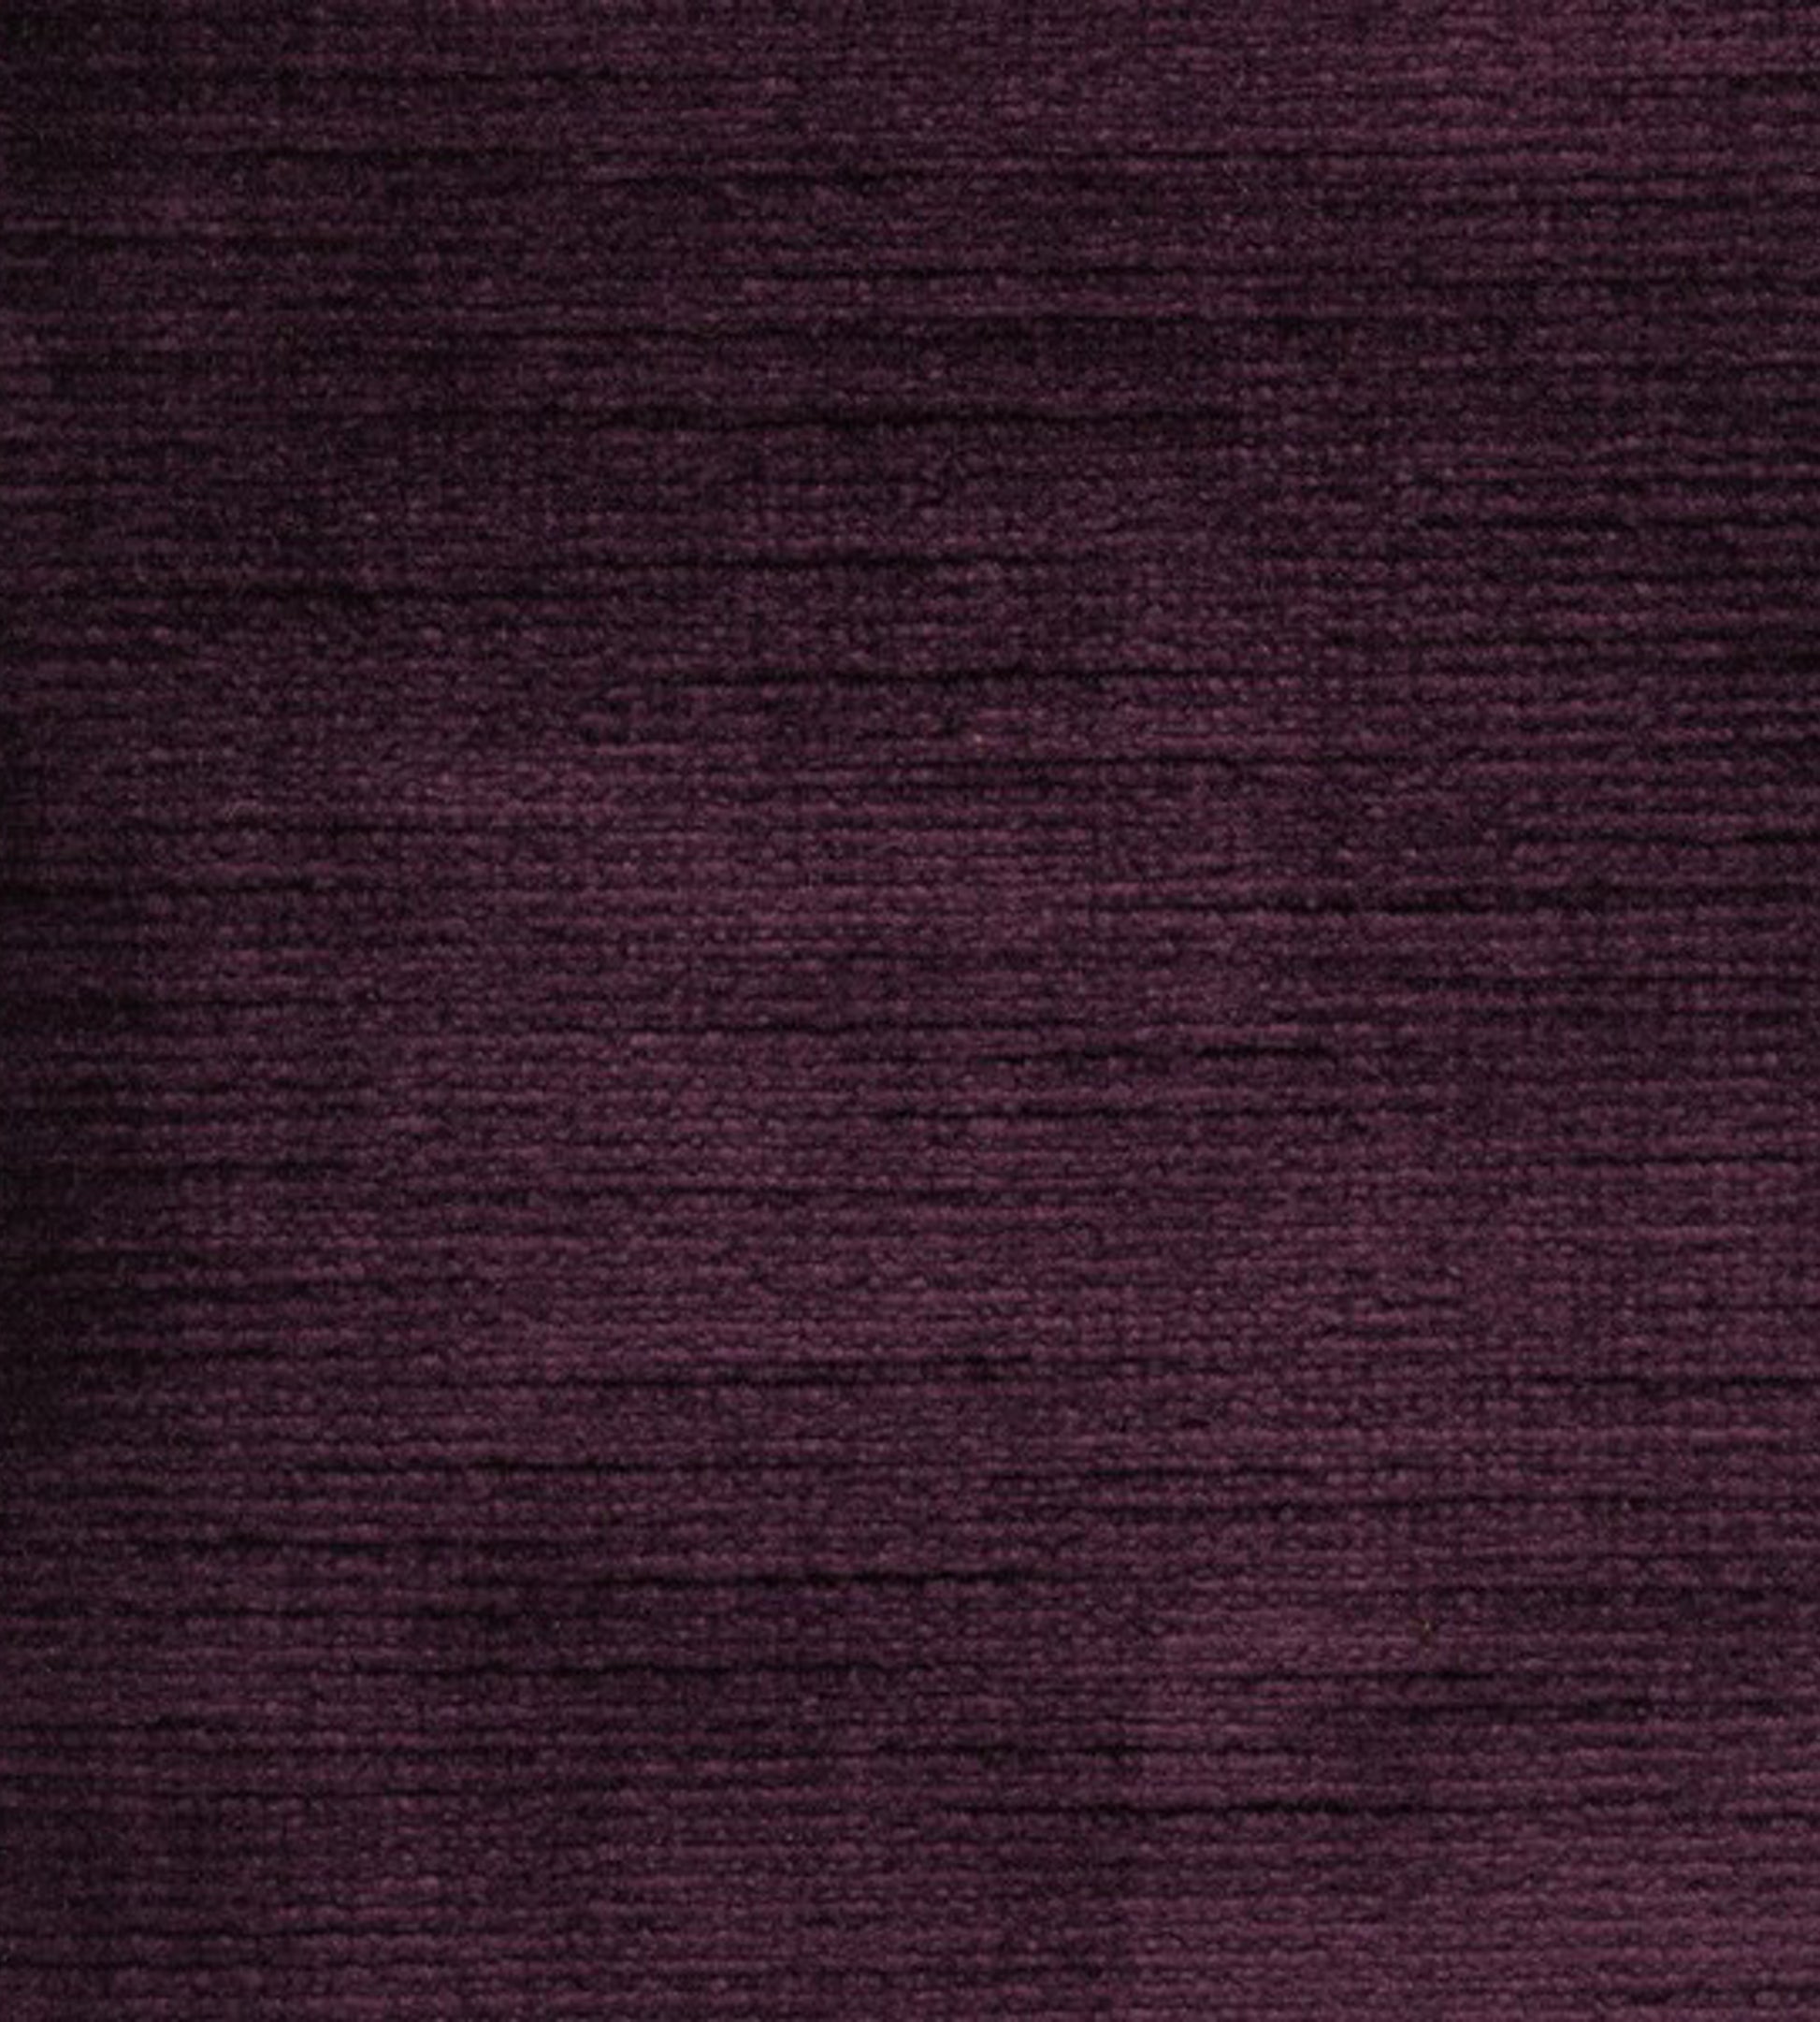 Purchase Old World Weavers Fabric SKU# AB 04634920, Taos Mulberry 1